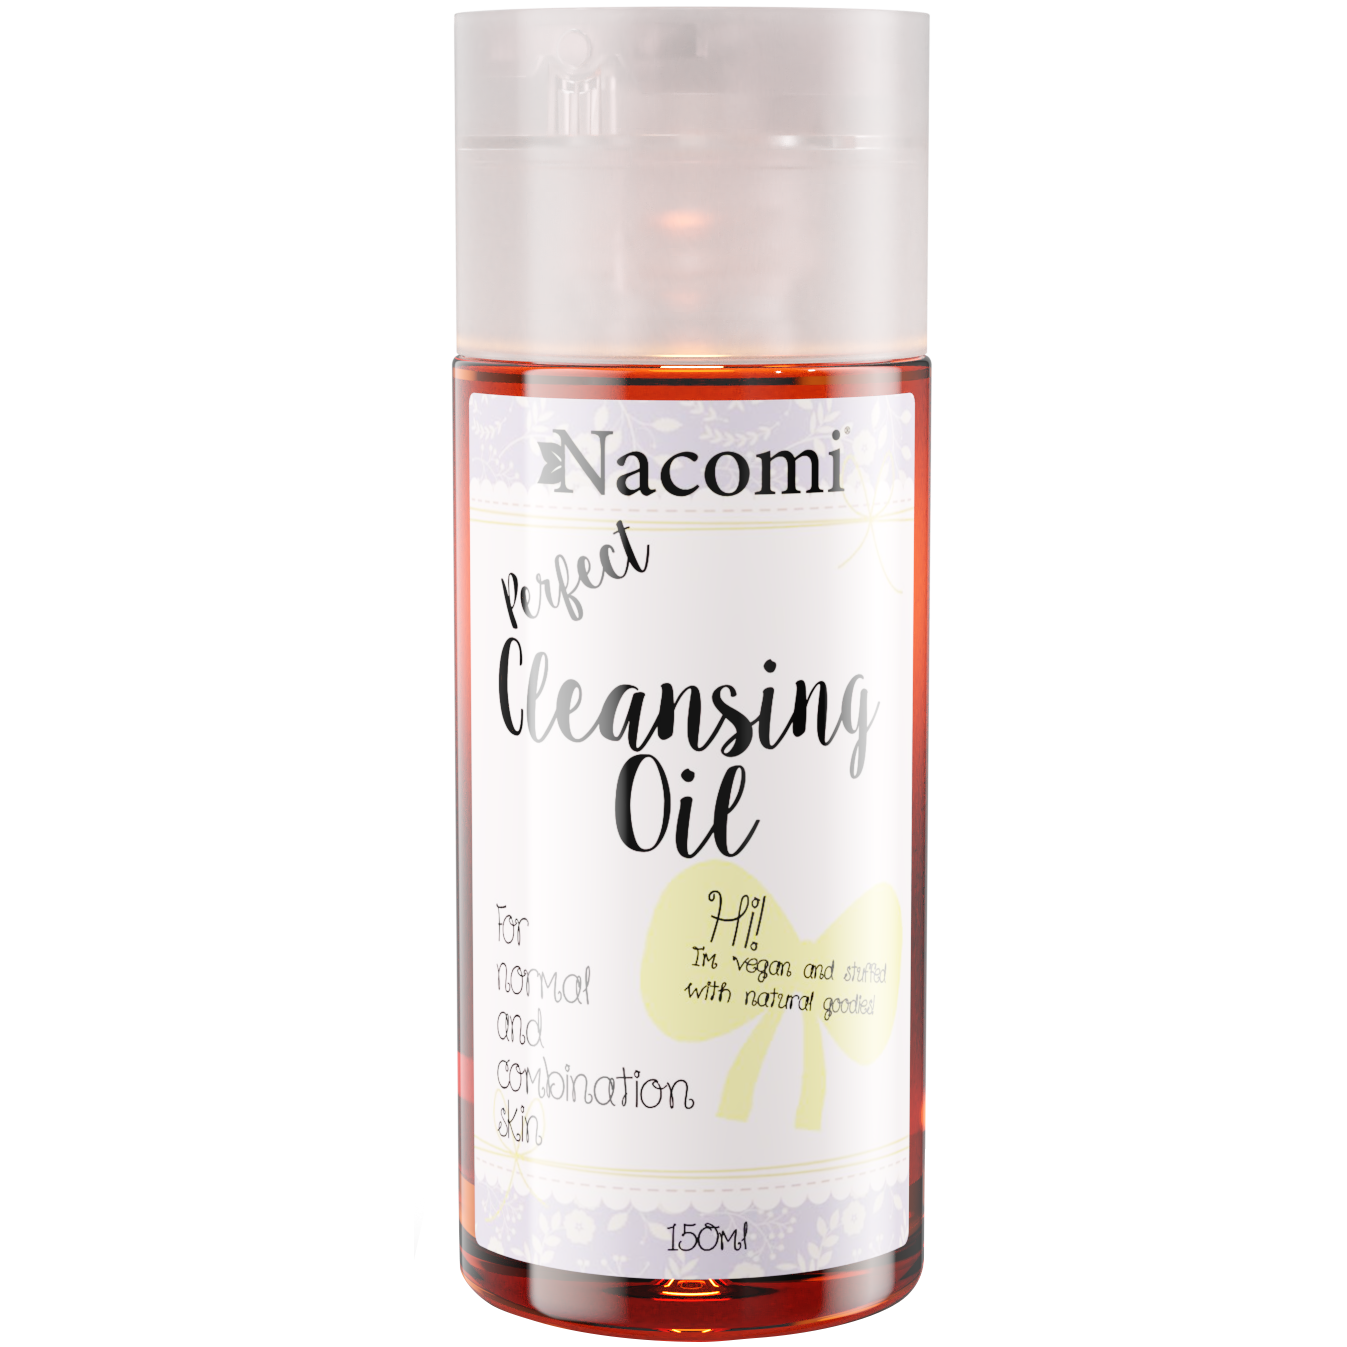 Nacomi Cleansing Oil